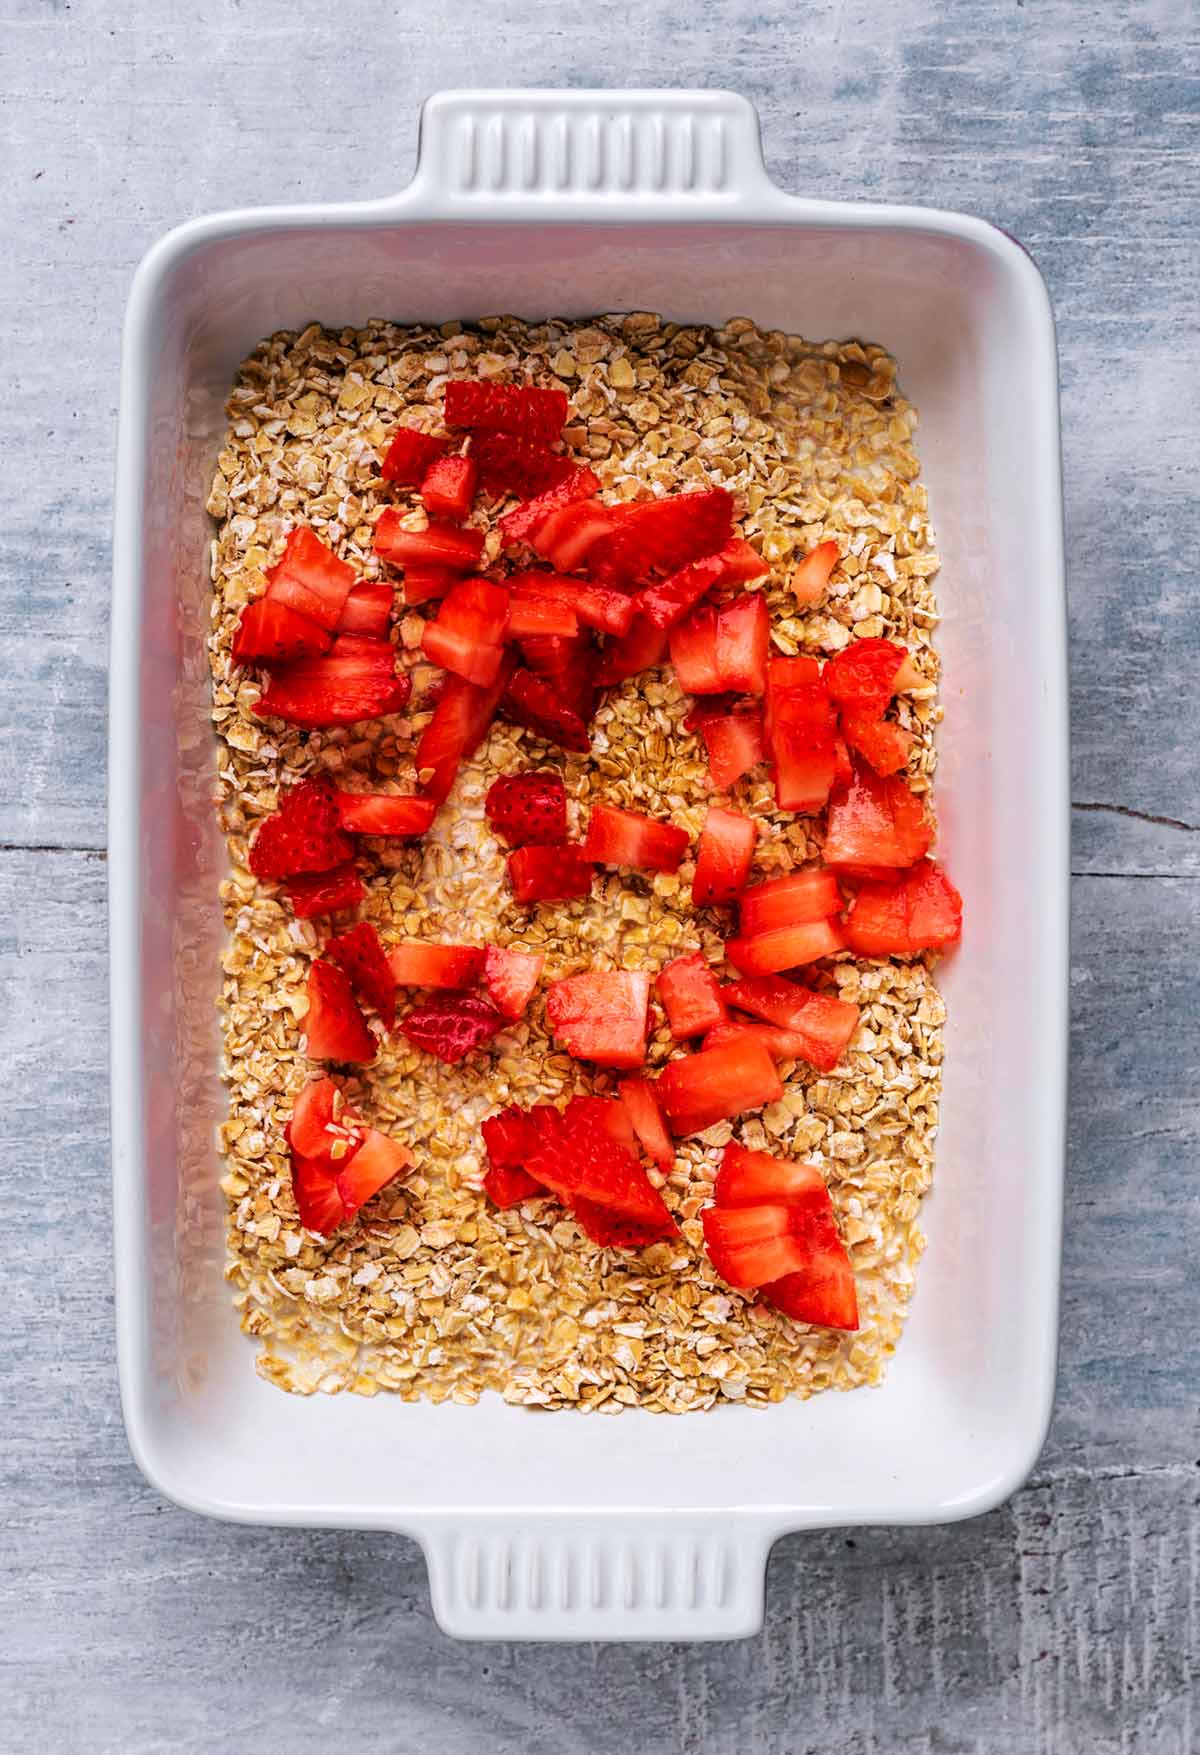 A baking dish containing oats, milk and chopped strawberry.